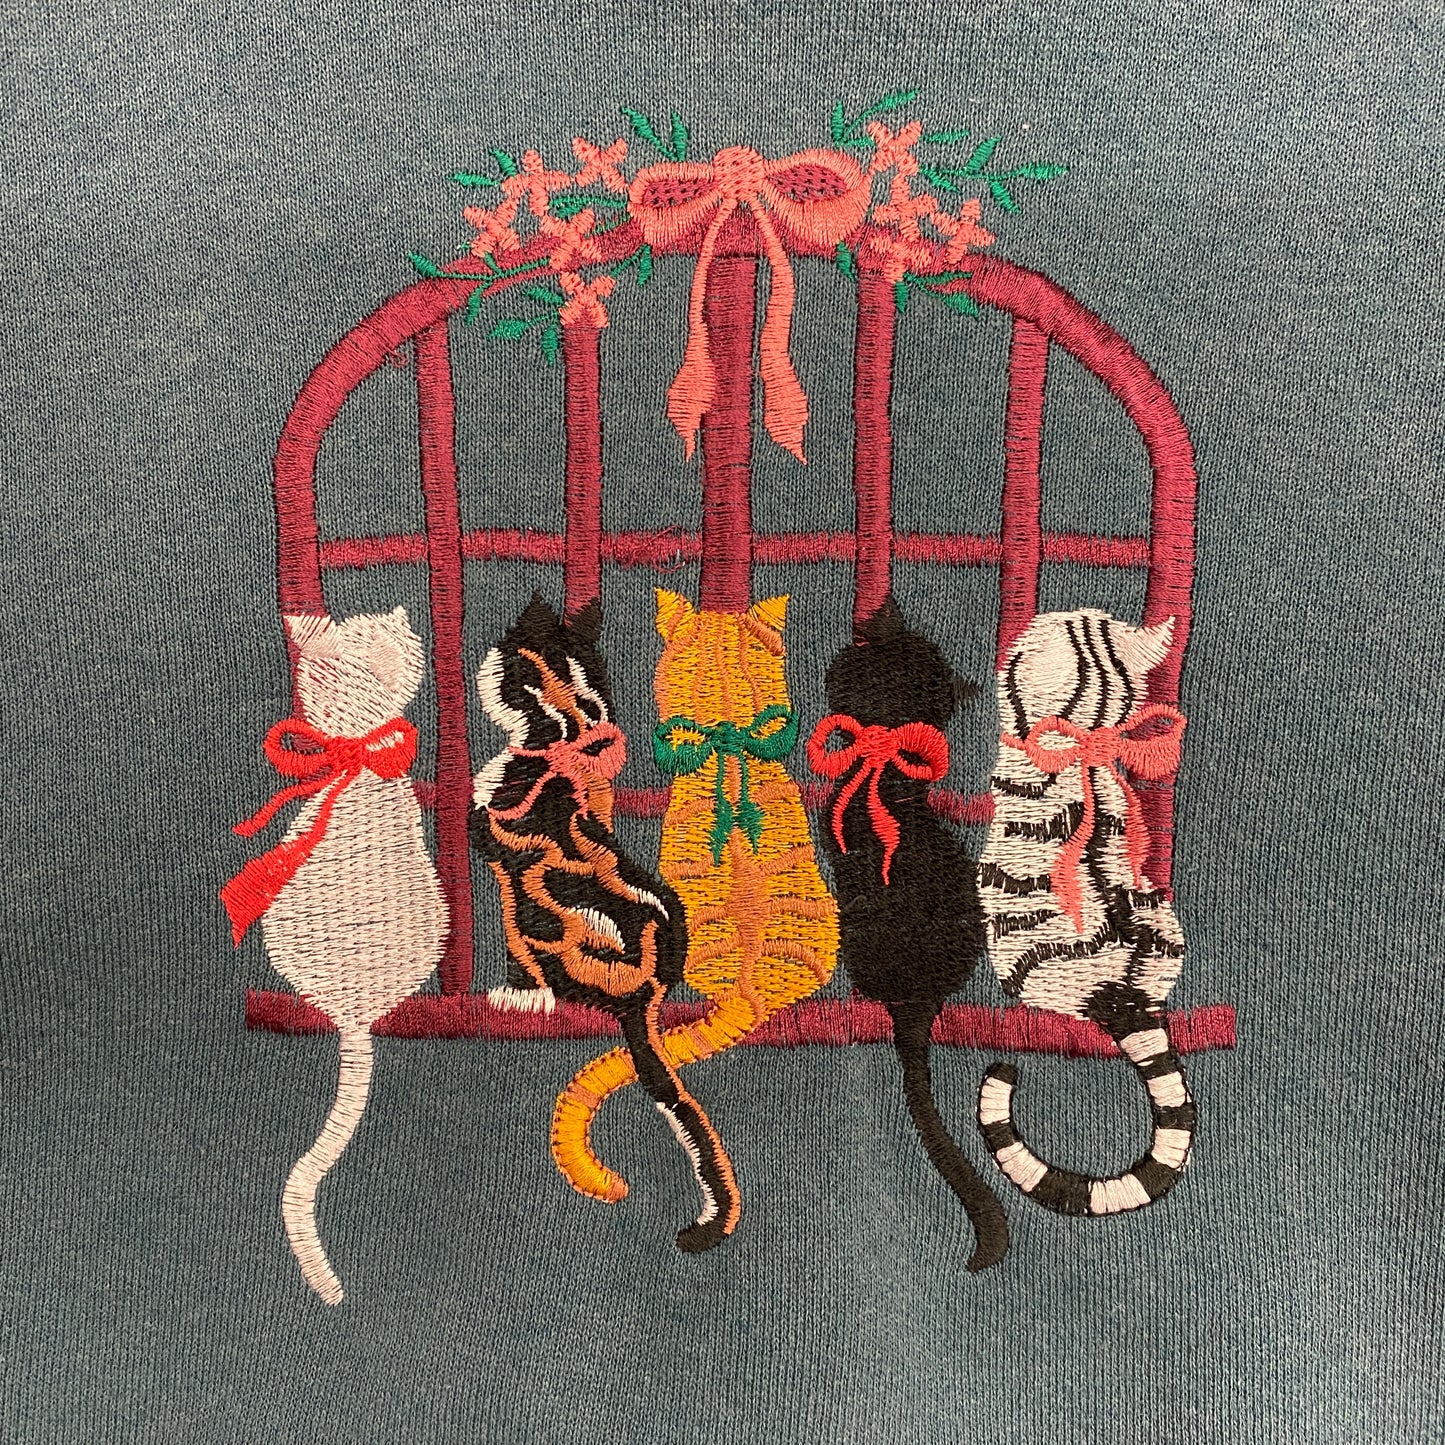 1990s Double Collar Embroidered Cats Sweatshirt - Size XL